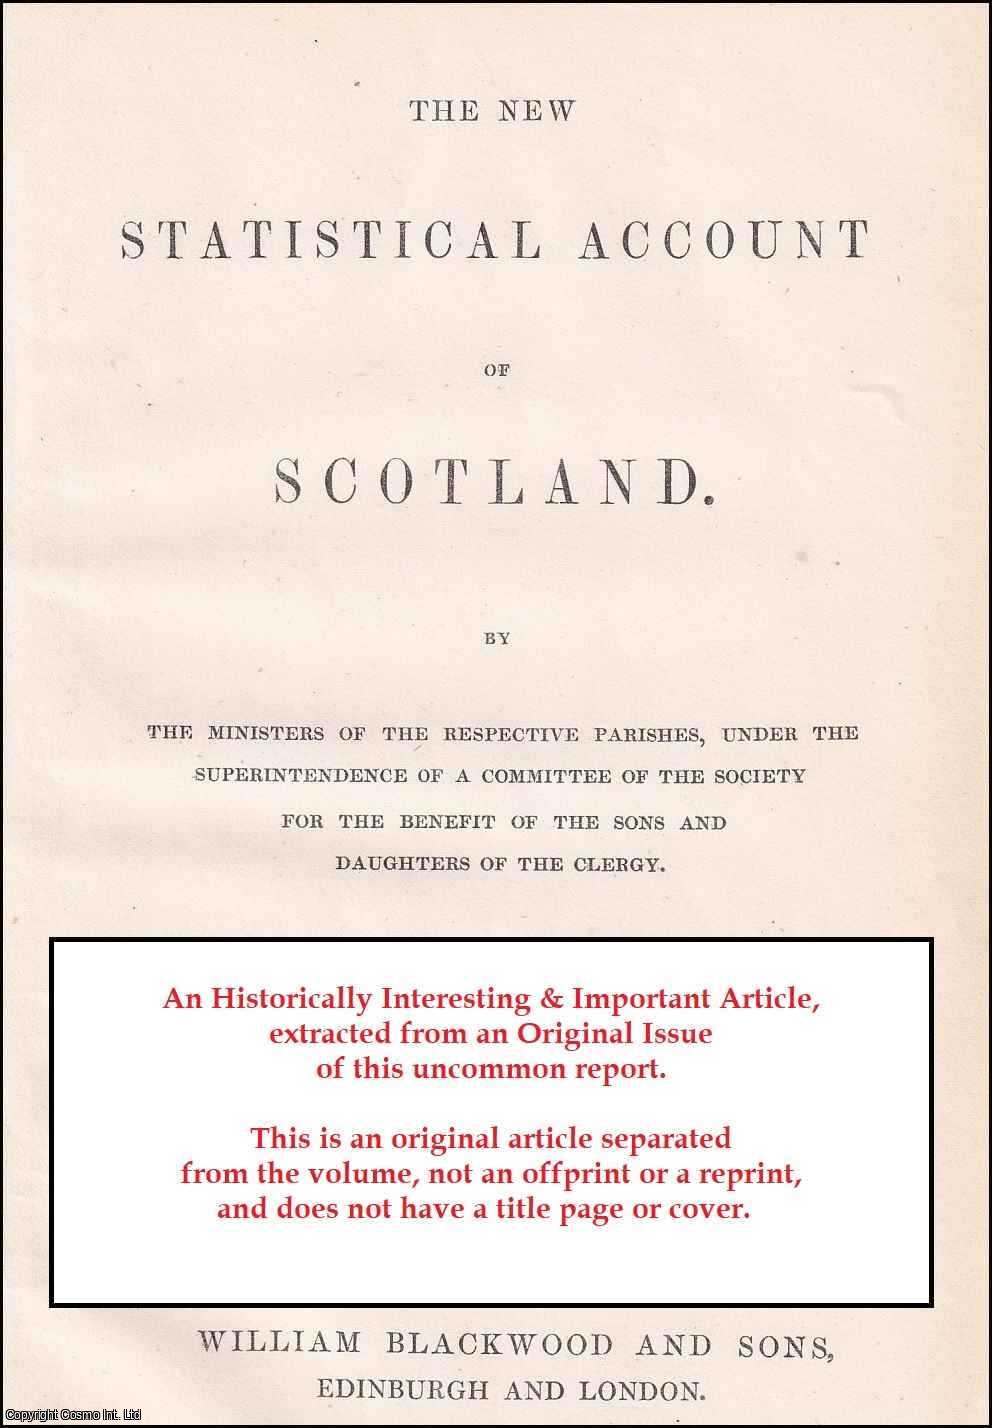 Rev. James Macdonald - Parish of Urray. Presbytery of Dingwall, Synod of Ross. An uncommon original article from The New Statistical Account of Scotland, 1845.